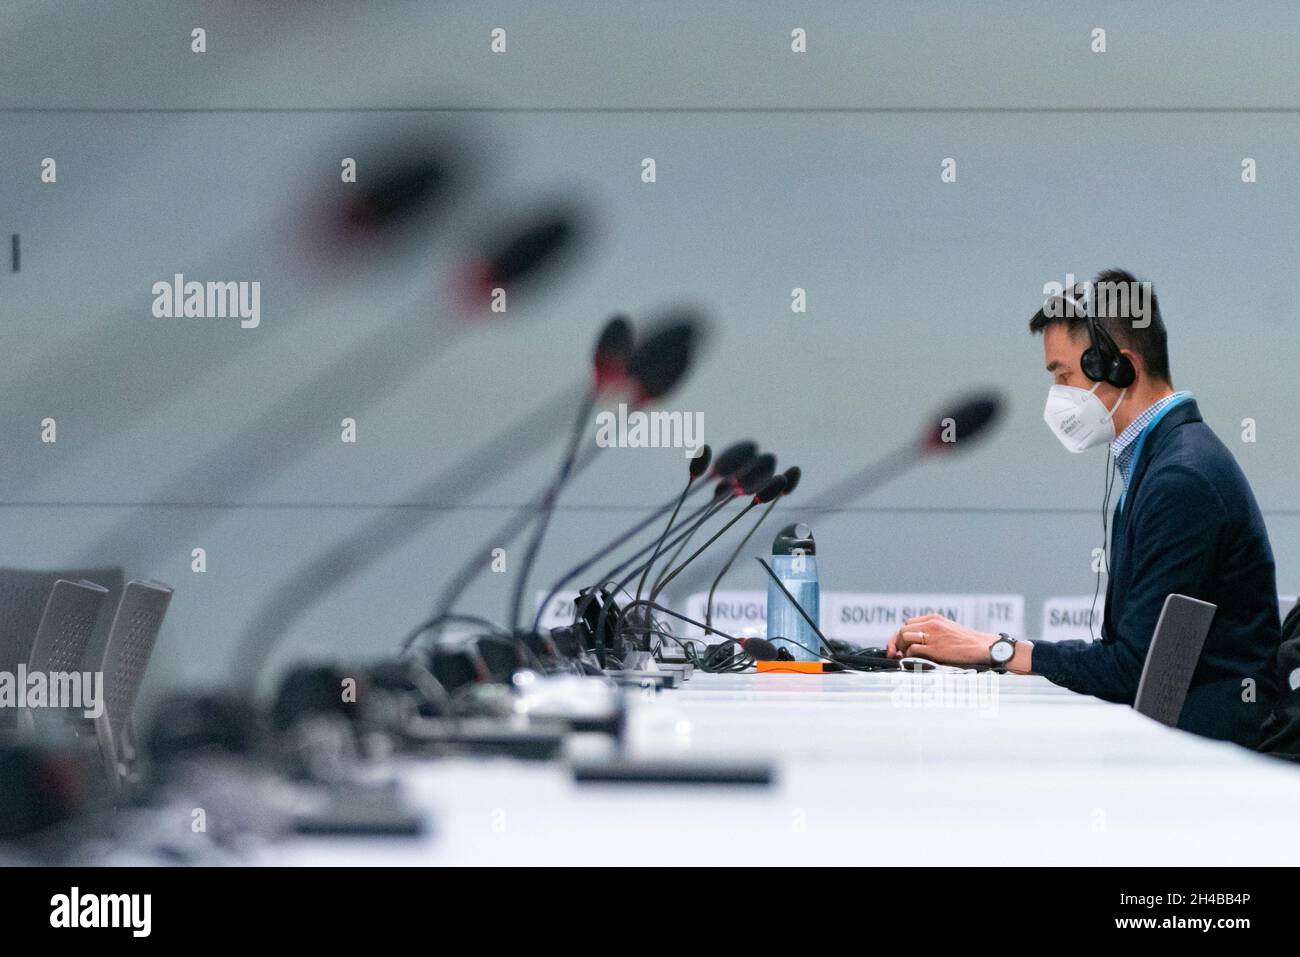 Glasgow, Scotland, UK. 1st November 2021. Images from Monday at the UN climate change conference in Glasgow. Pic;  Delegate to conference listens to Plenary Session speeches by Prime ministers of countries attending the conference Iain Masterton/Alamy Live News. Stock Photo